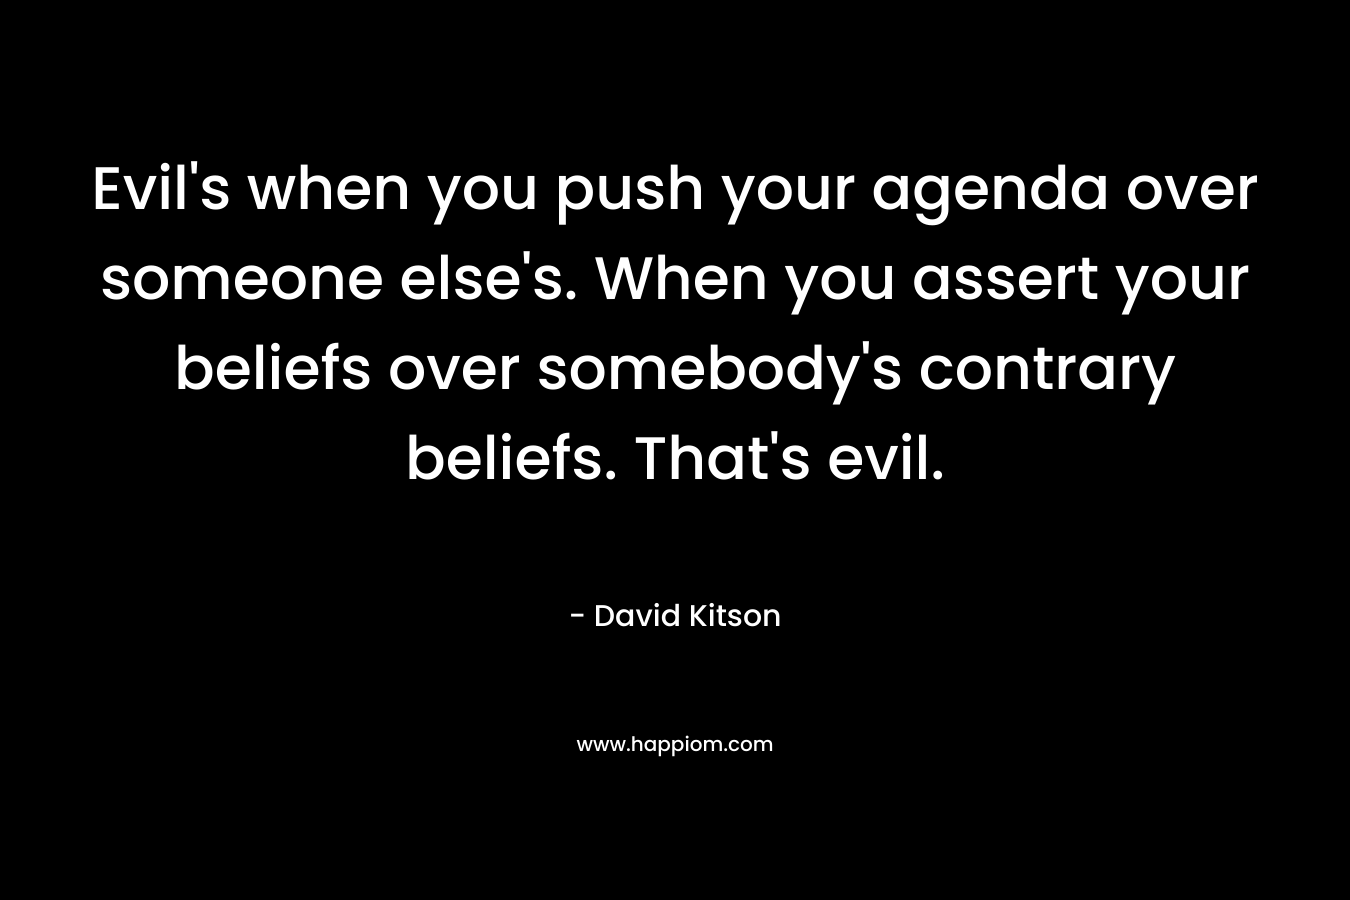 Evil’s when you push your agenda over someone else’s. When you assert your beliefs over somebody’s contrary beliefs. That’s evil. – David Kitson